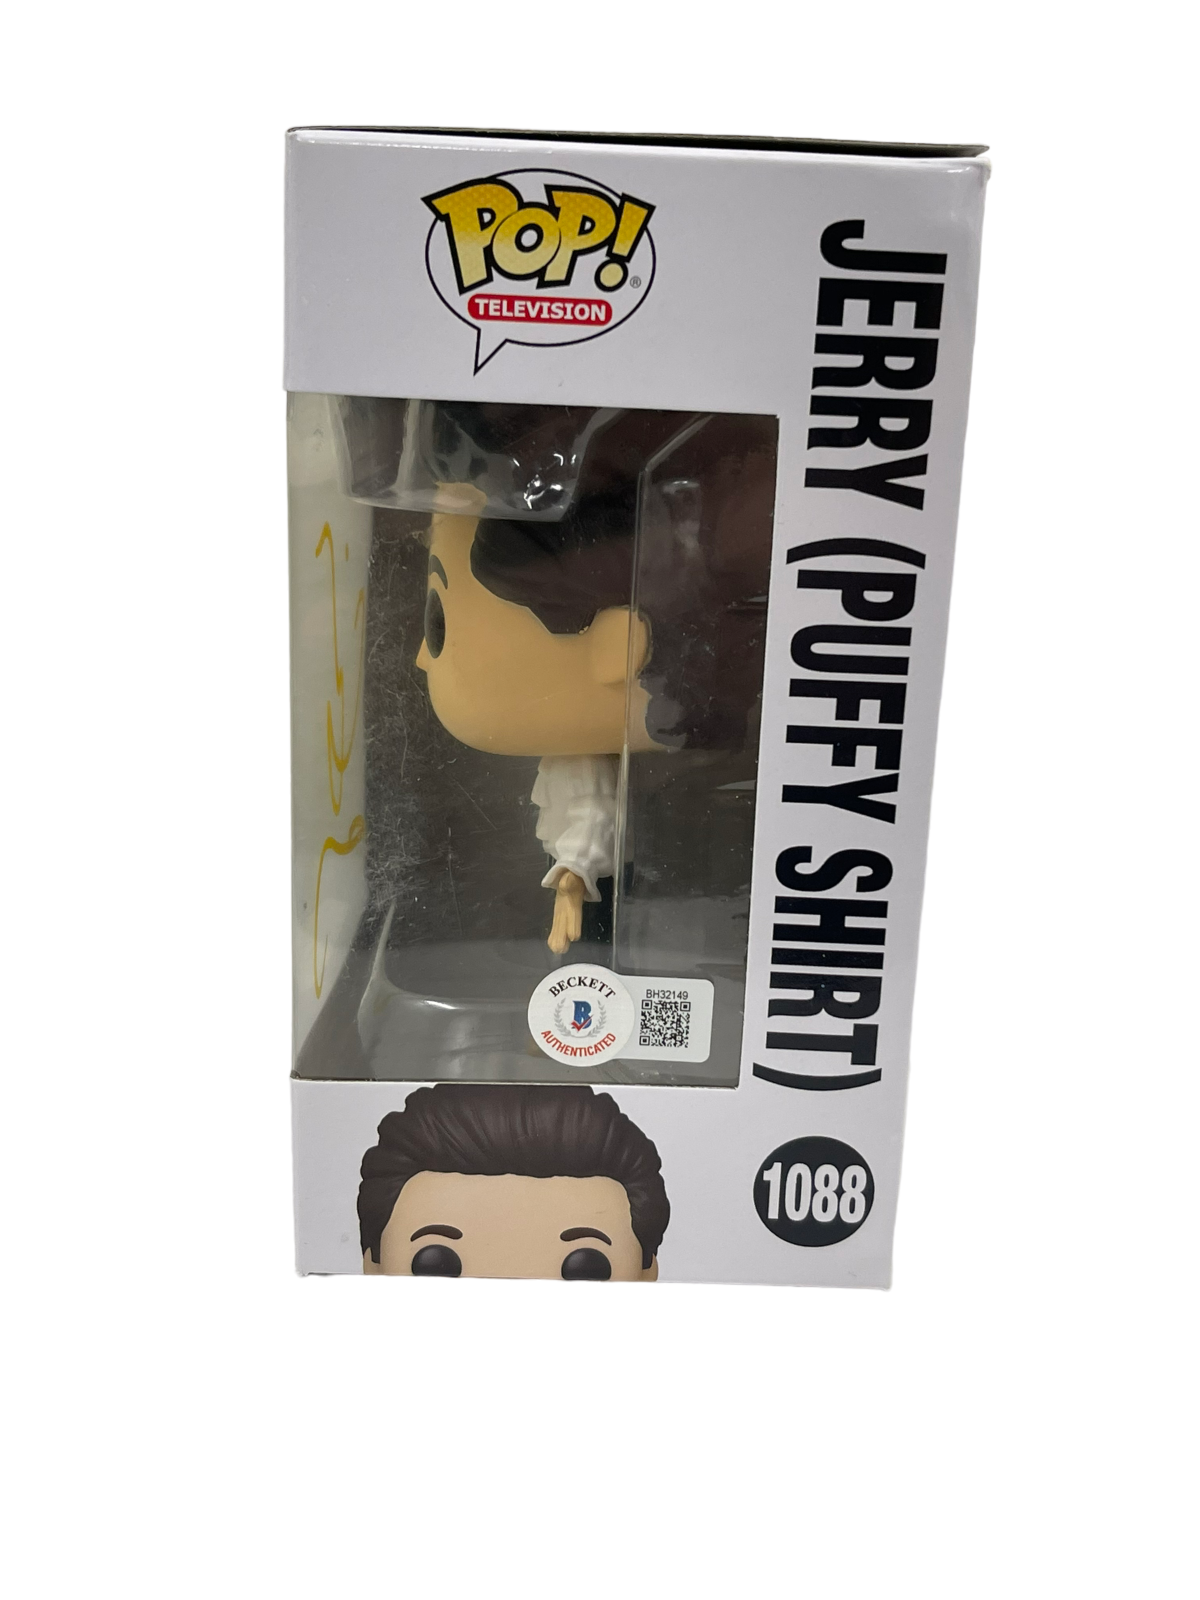 Jerry Seinfeld Authentic Autographed Jerry (Puffy Shirt) Seinfeld 1088  Funko Pop Figure